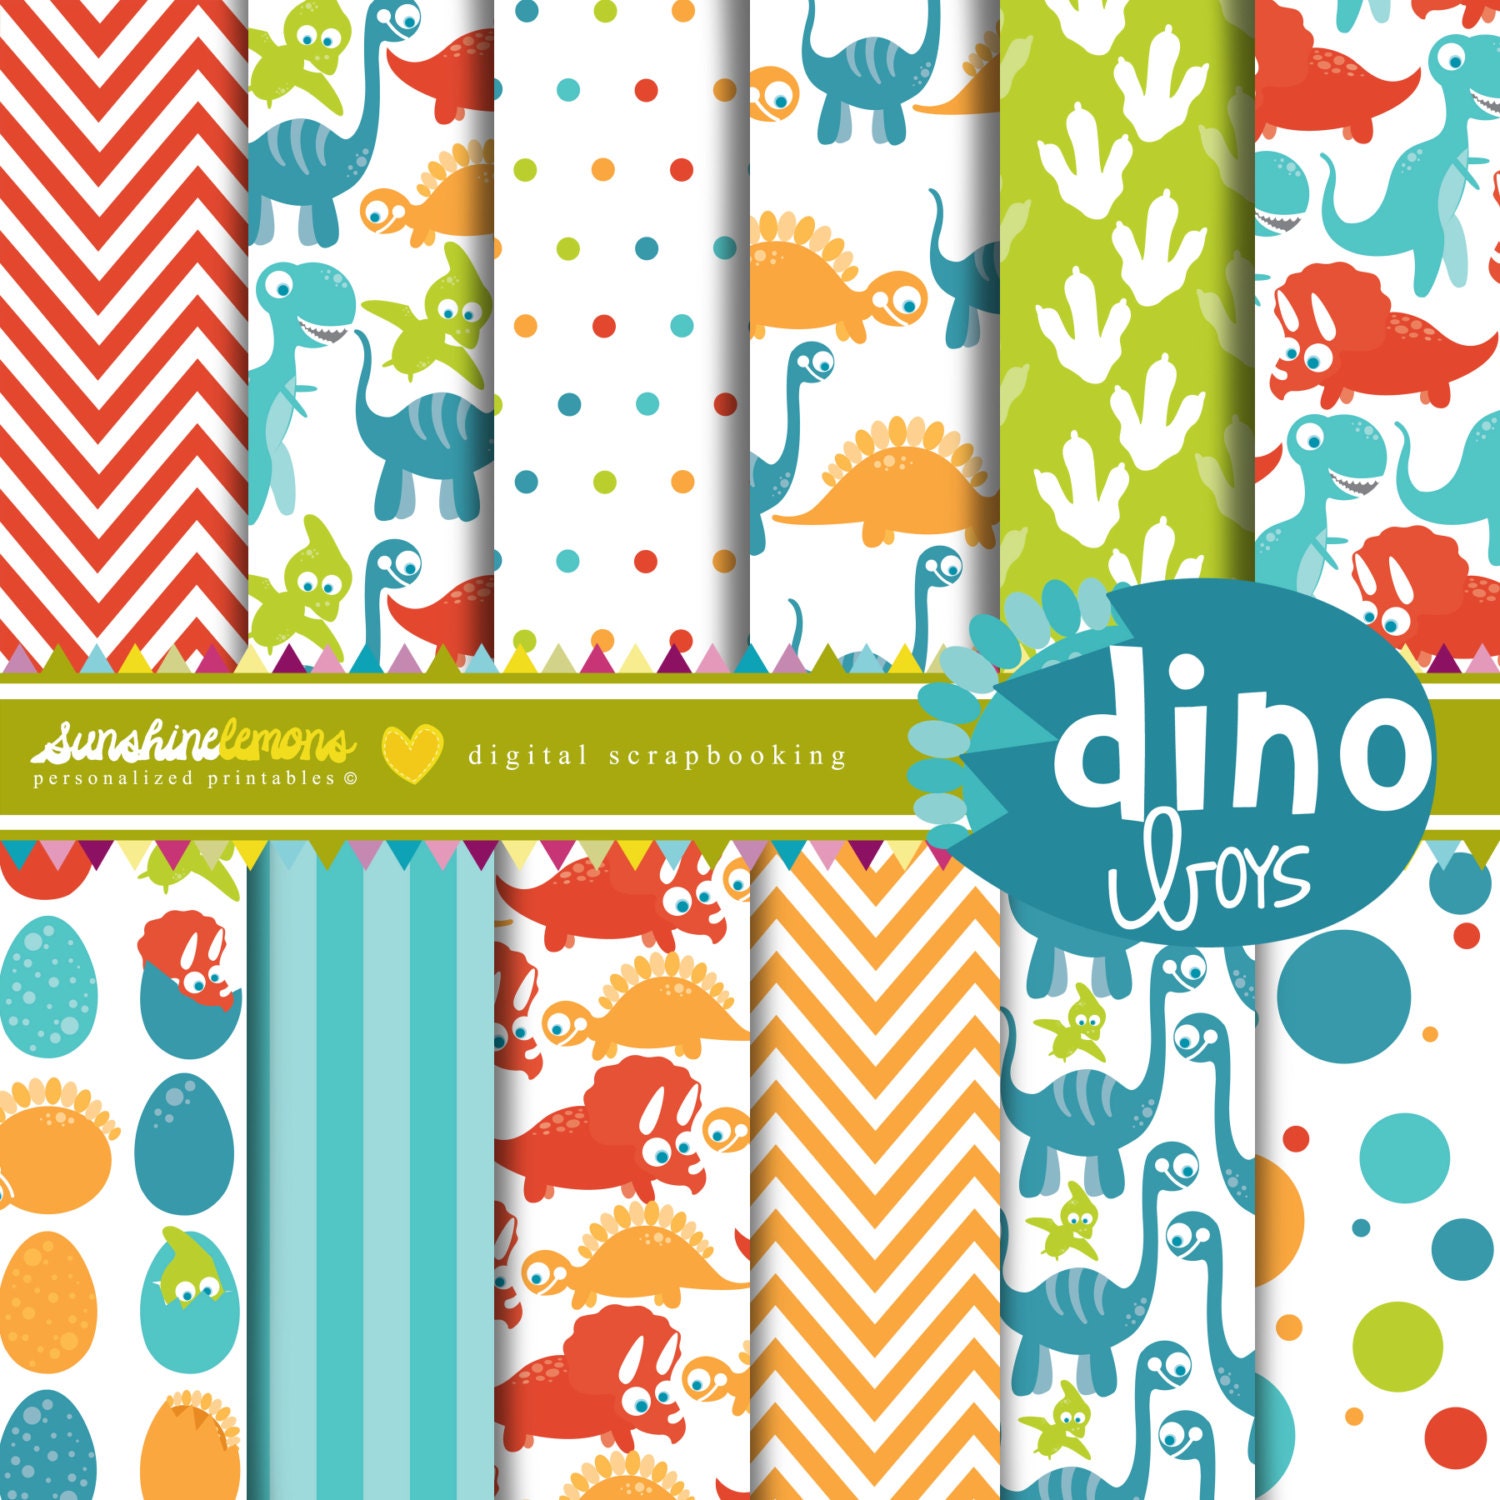 Download Dino Boys Digital Scrapbooking Paper Set COMMERCIAL USE Read